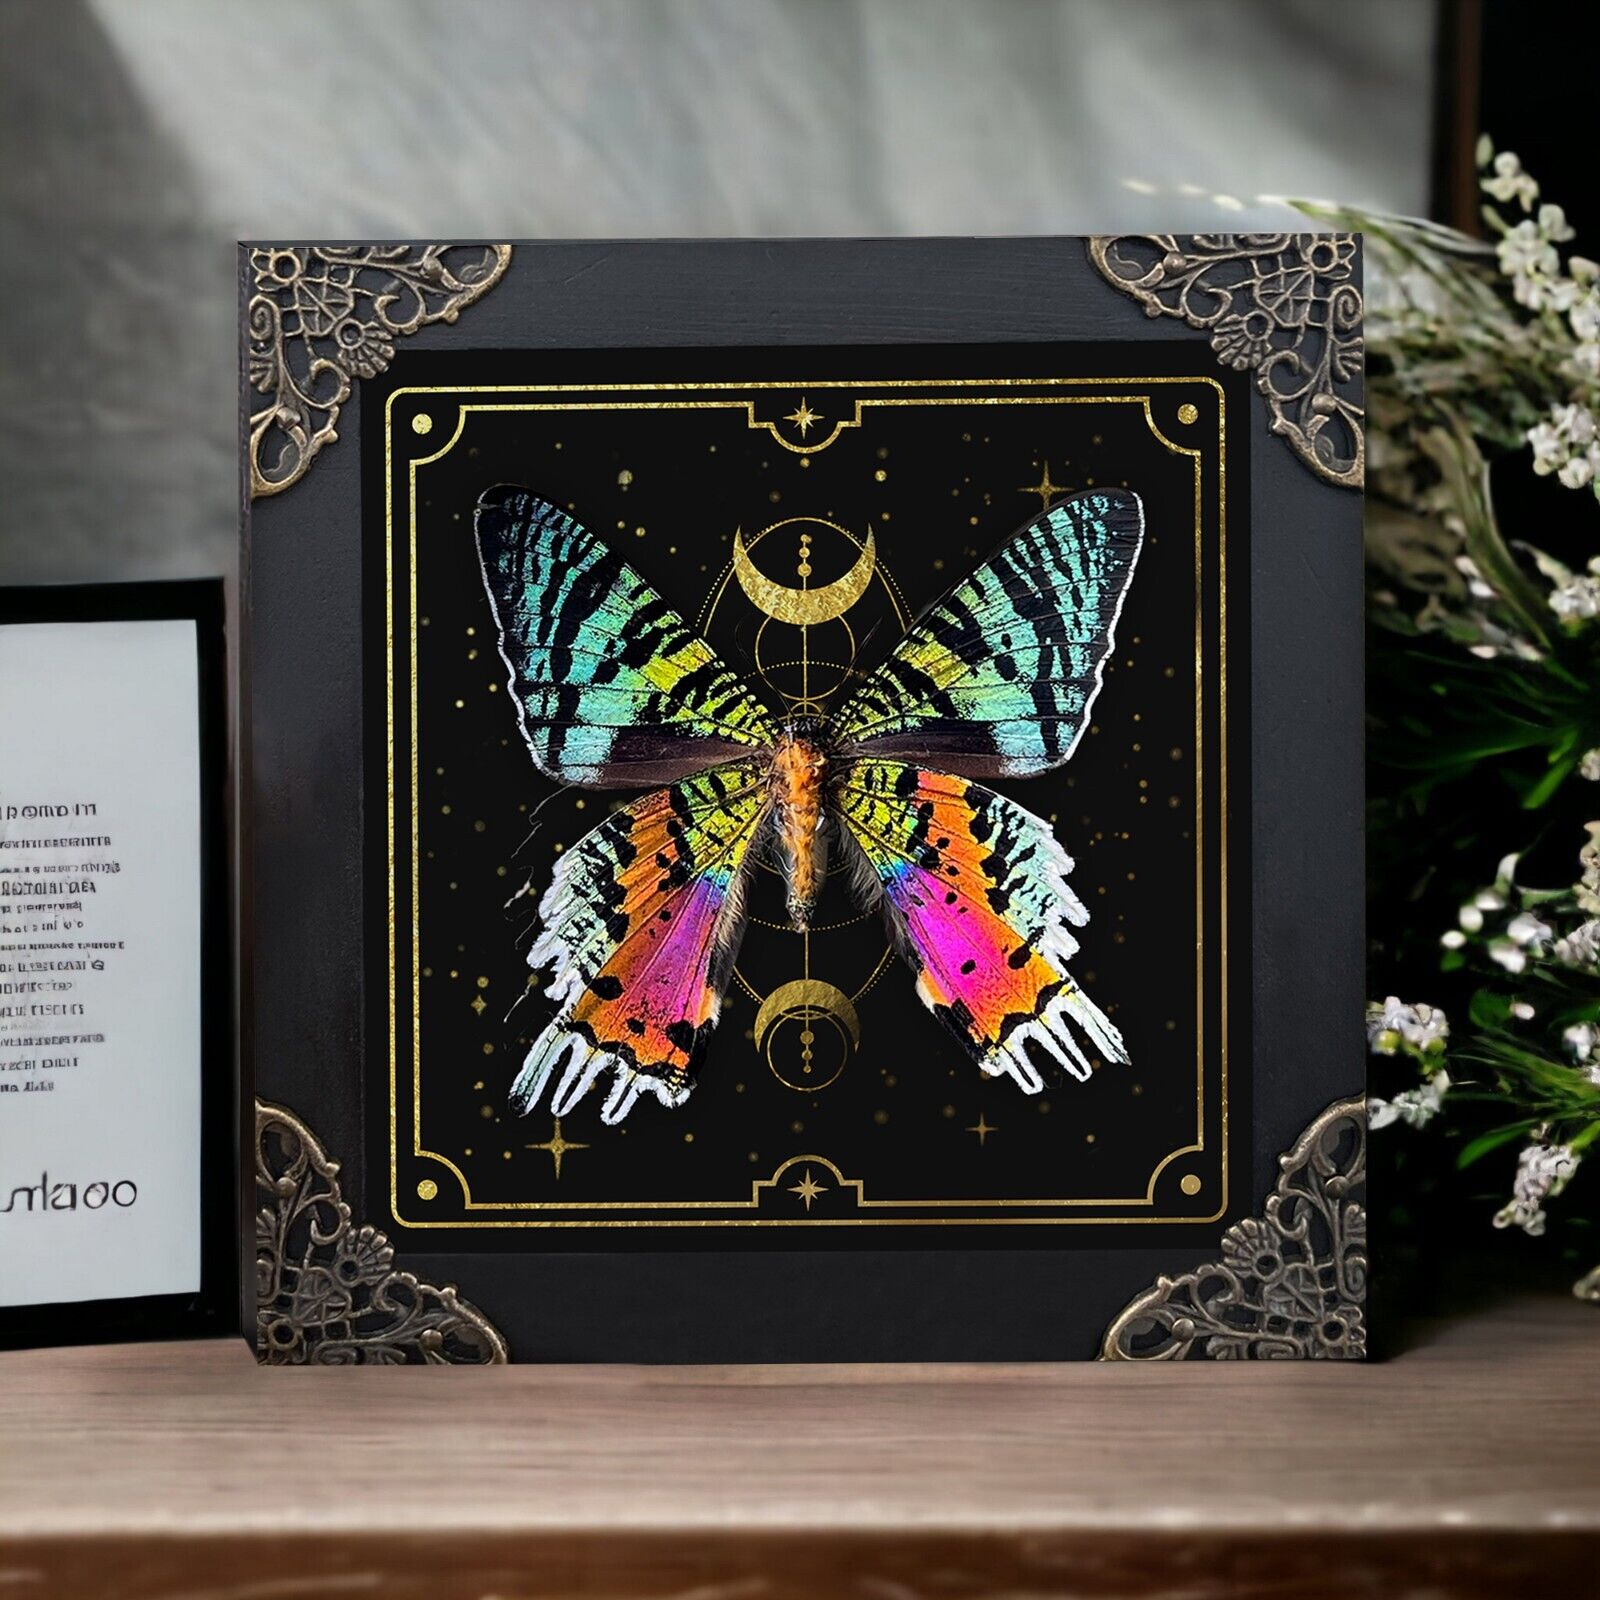 Real Sunset Moth Art Framed Occult Dried Taxidermy Insect Bugs Gothic Decor